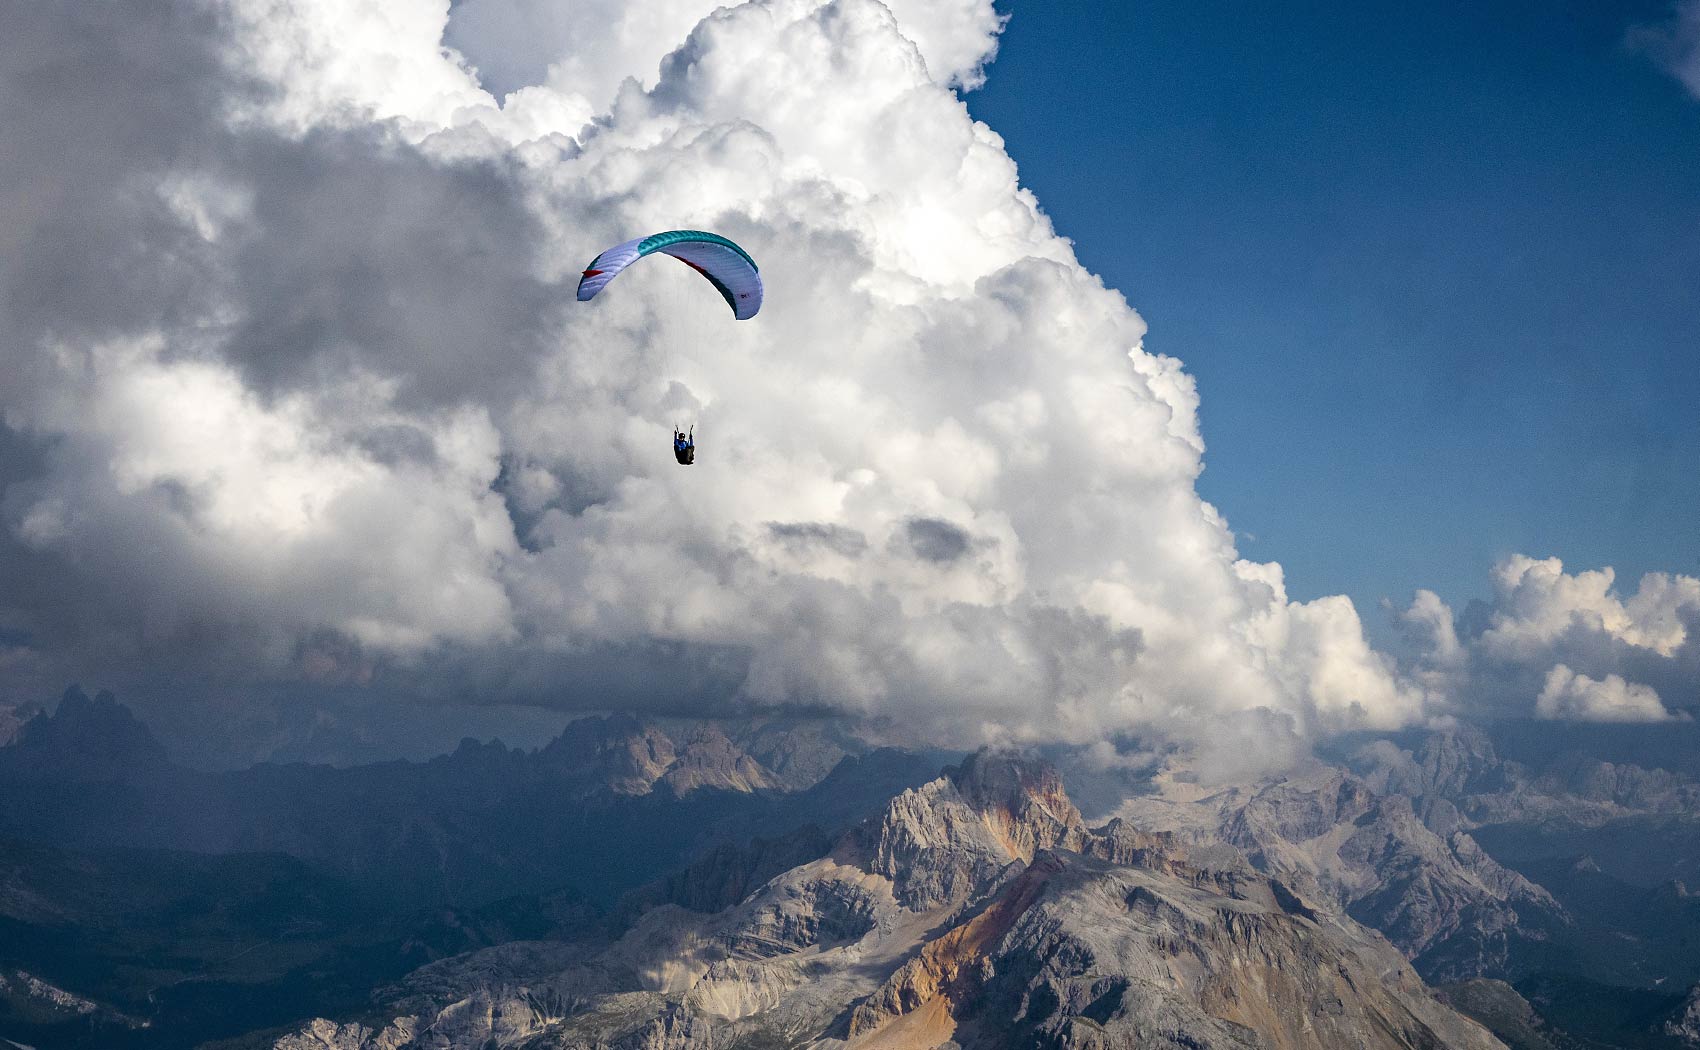 Paragliding above the Dolomites